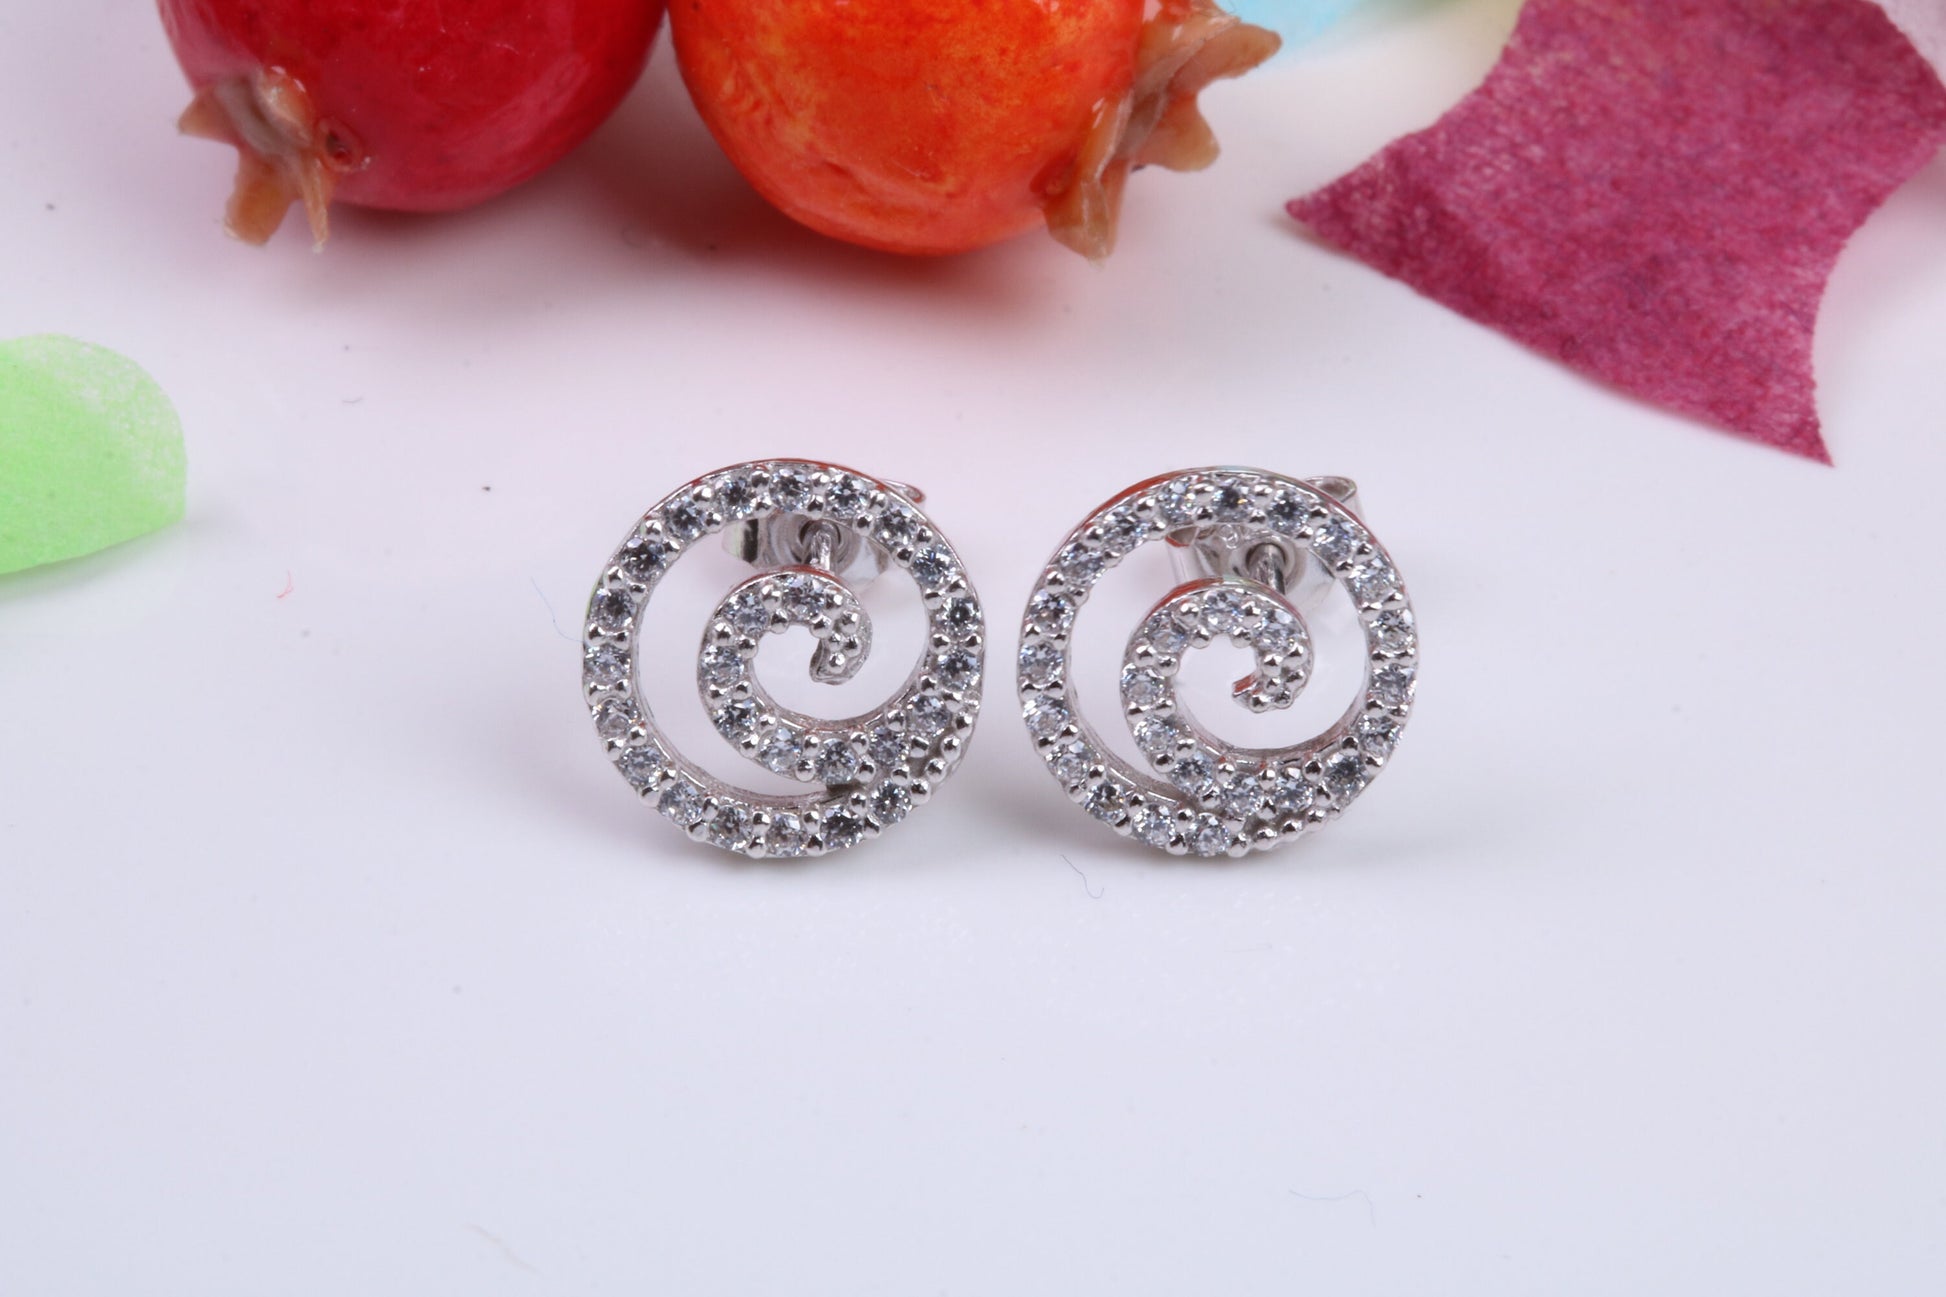 10 mm Round Swirl Cubic Zirconia set Earrings, Very Dressy, Made from Solid 925 Grade Sterling Silver